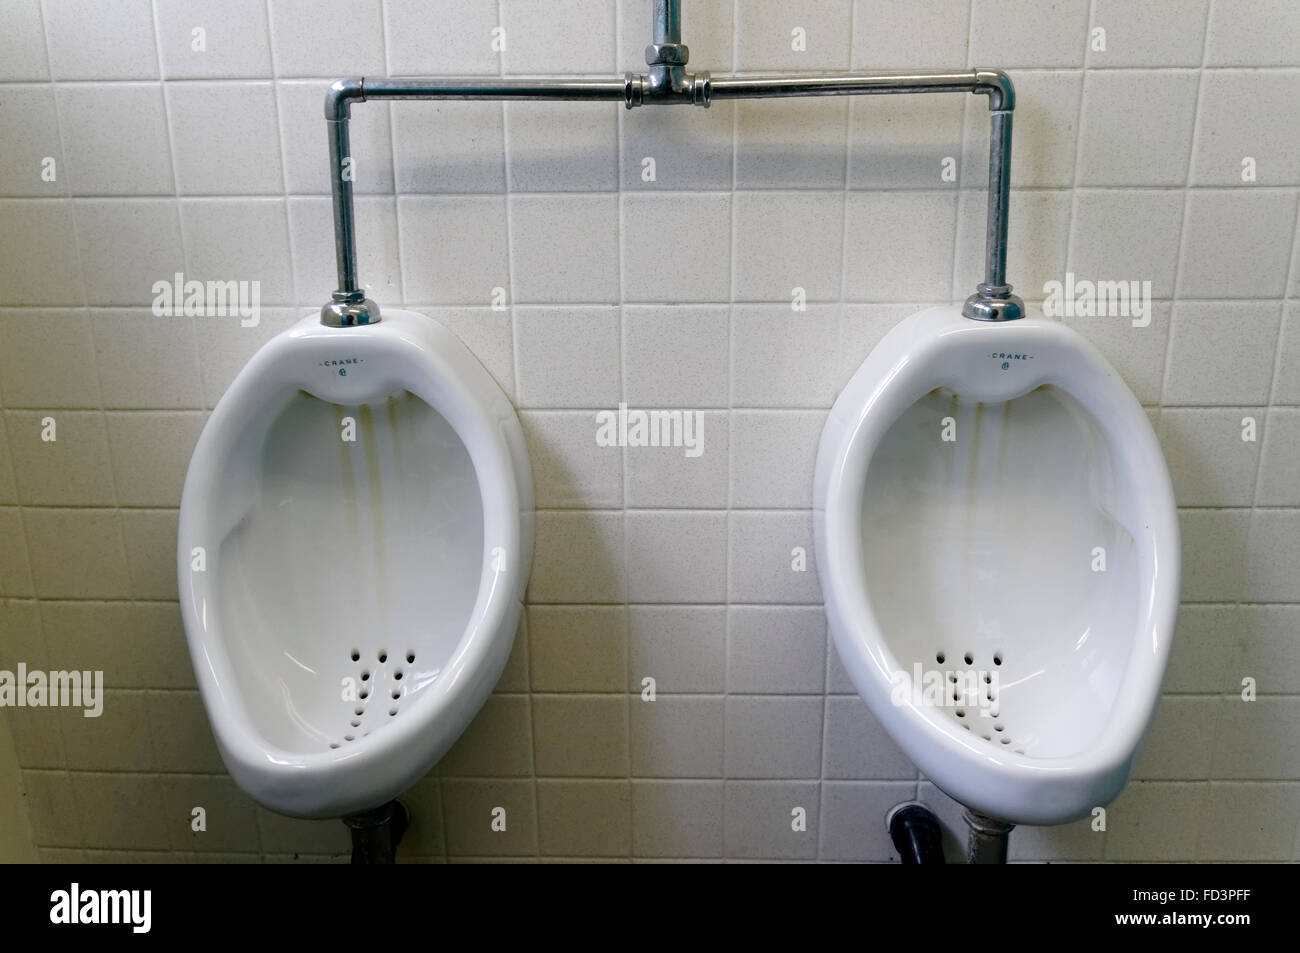 Pair of porcelain urinals in a public washroom Stock Photo